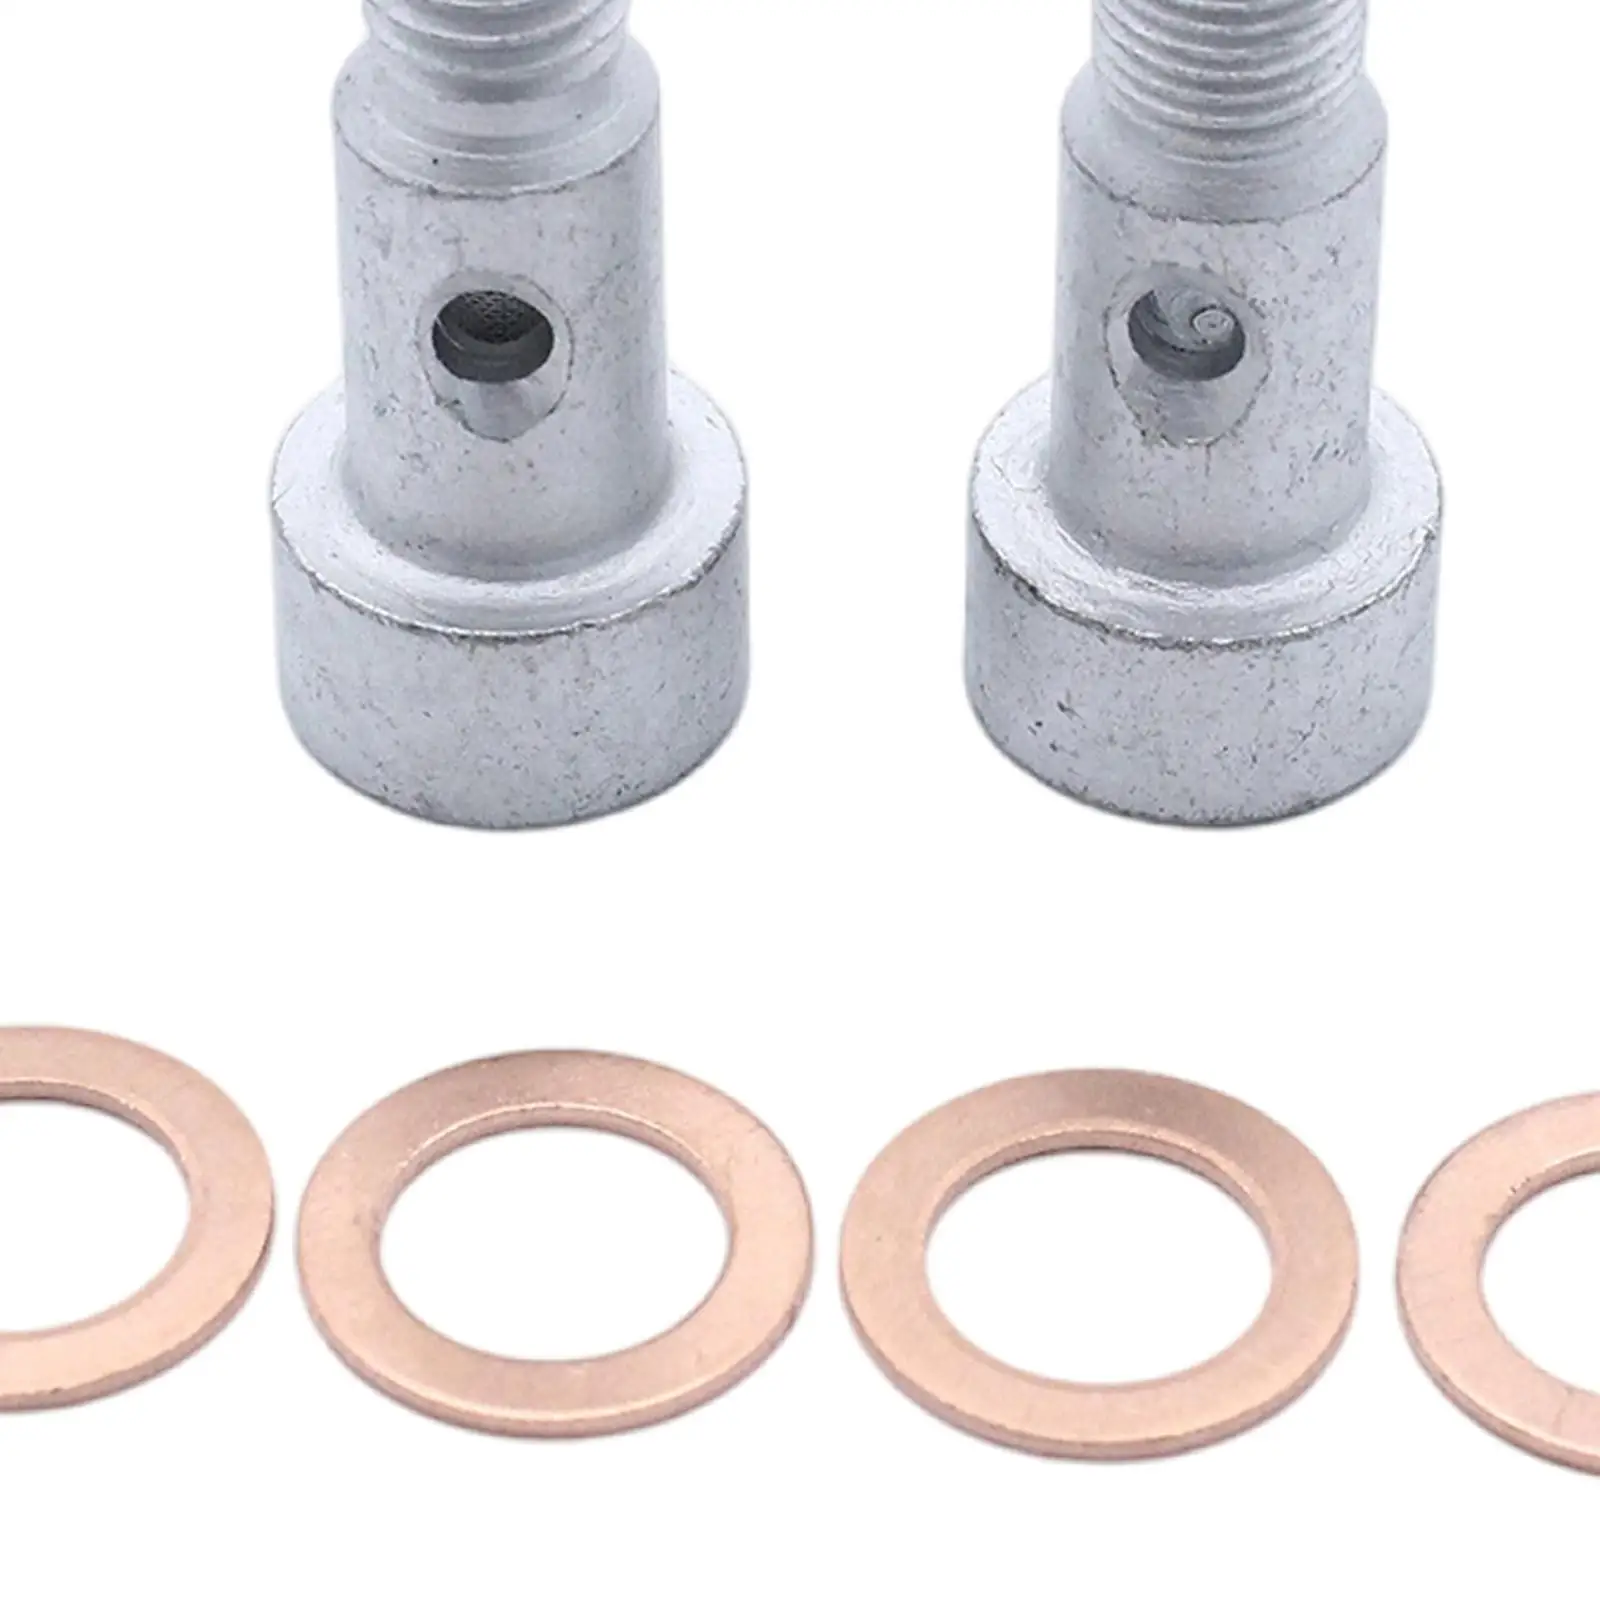 Turbo Fitting Washers Bolts Kit fits for Citroen 1.6 , Accessories